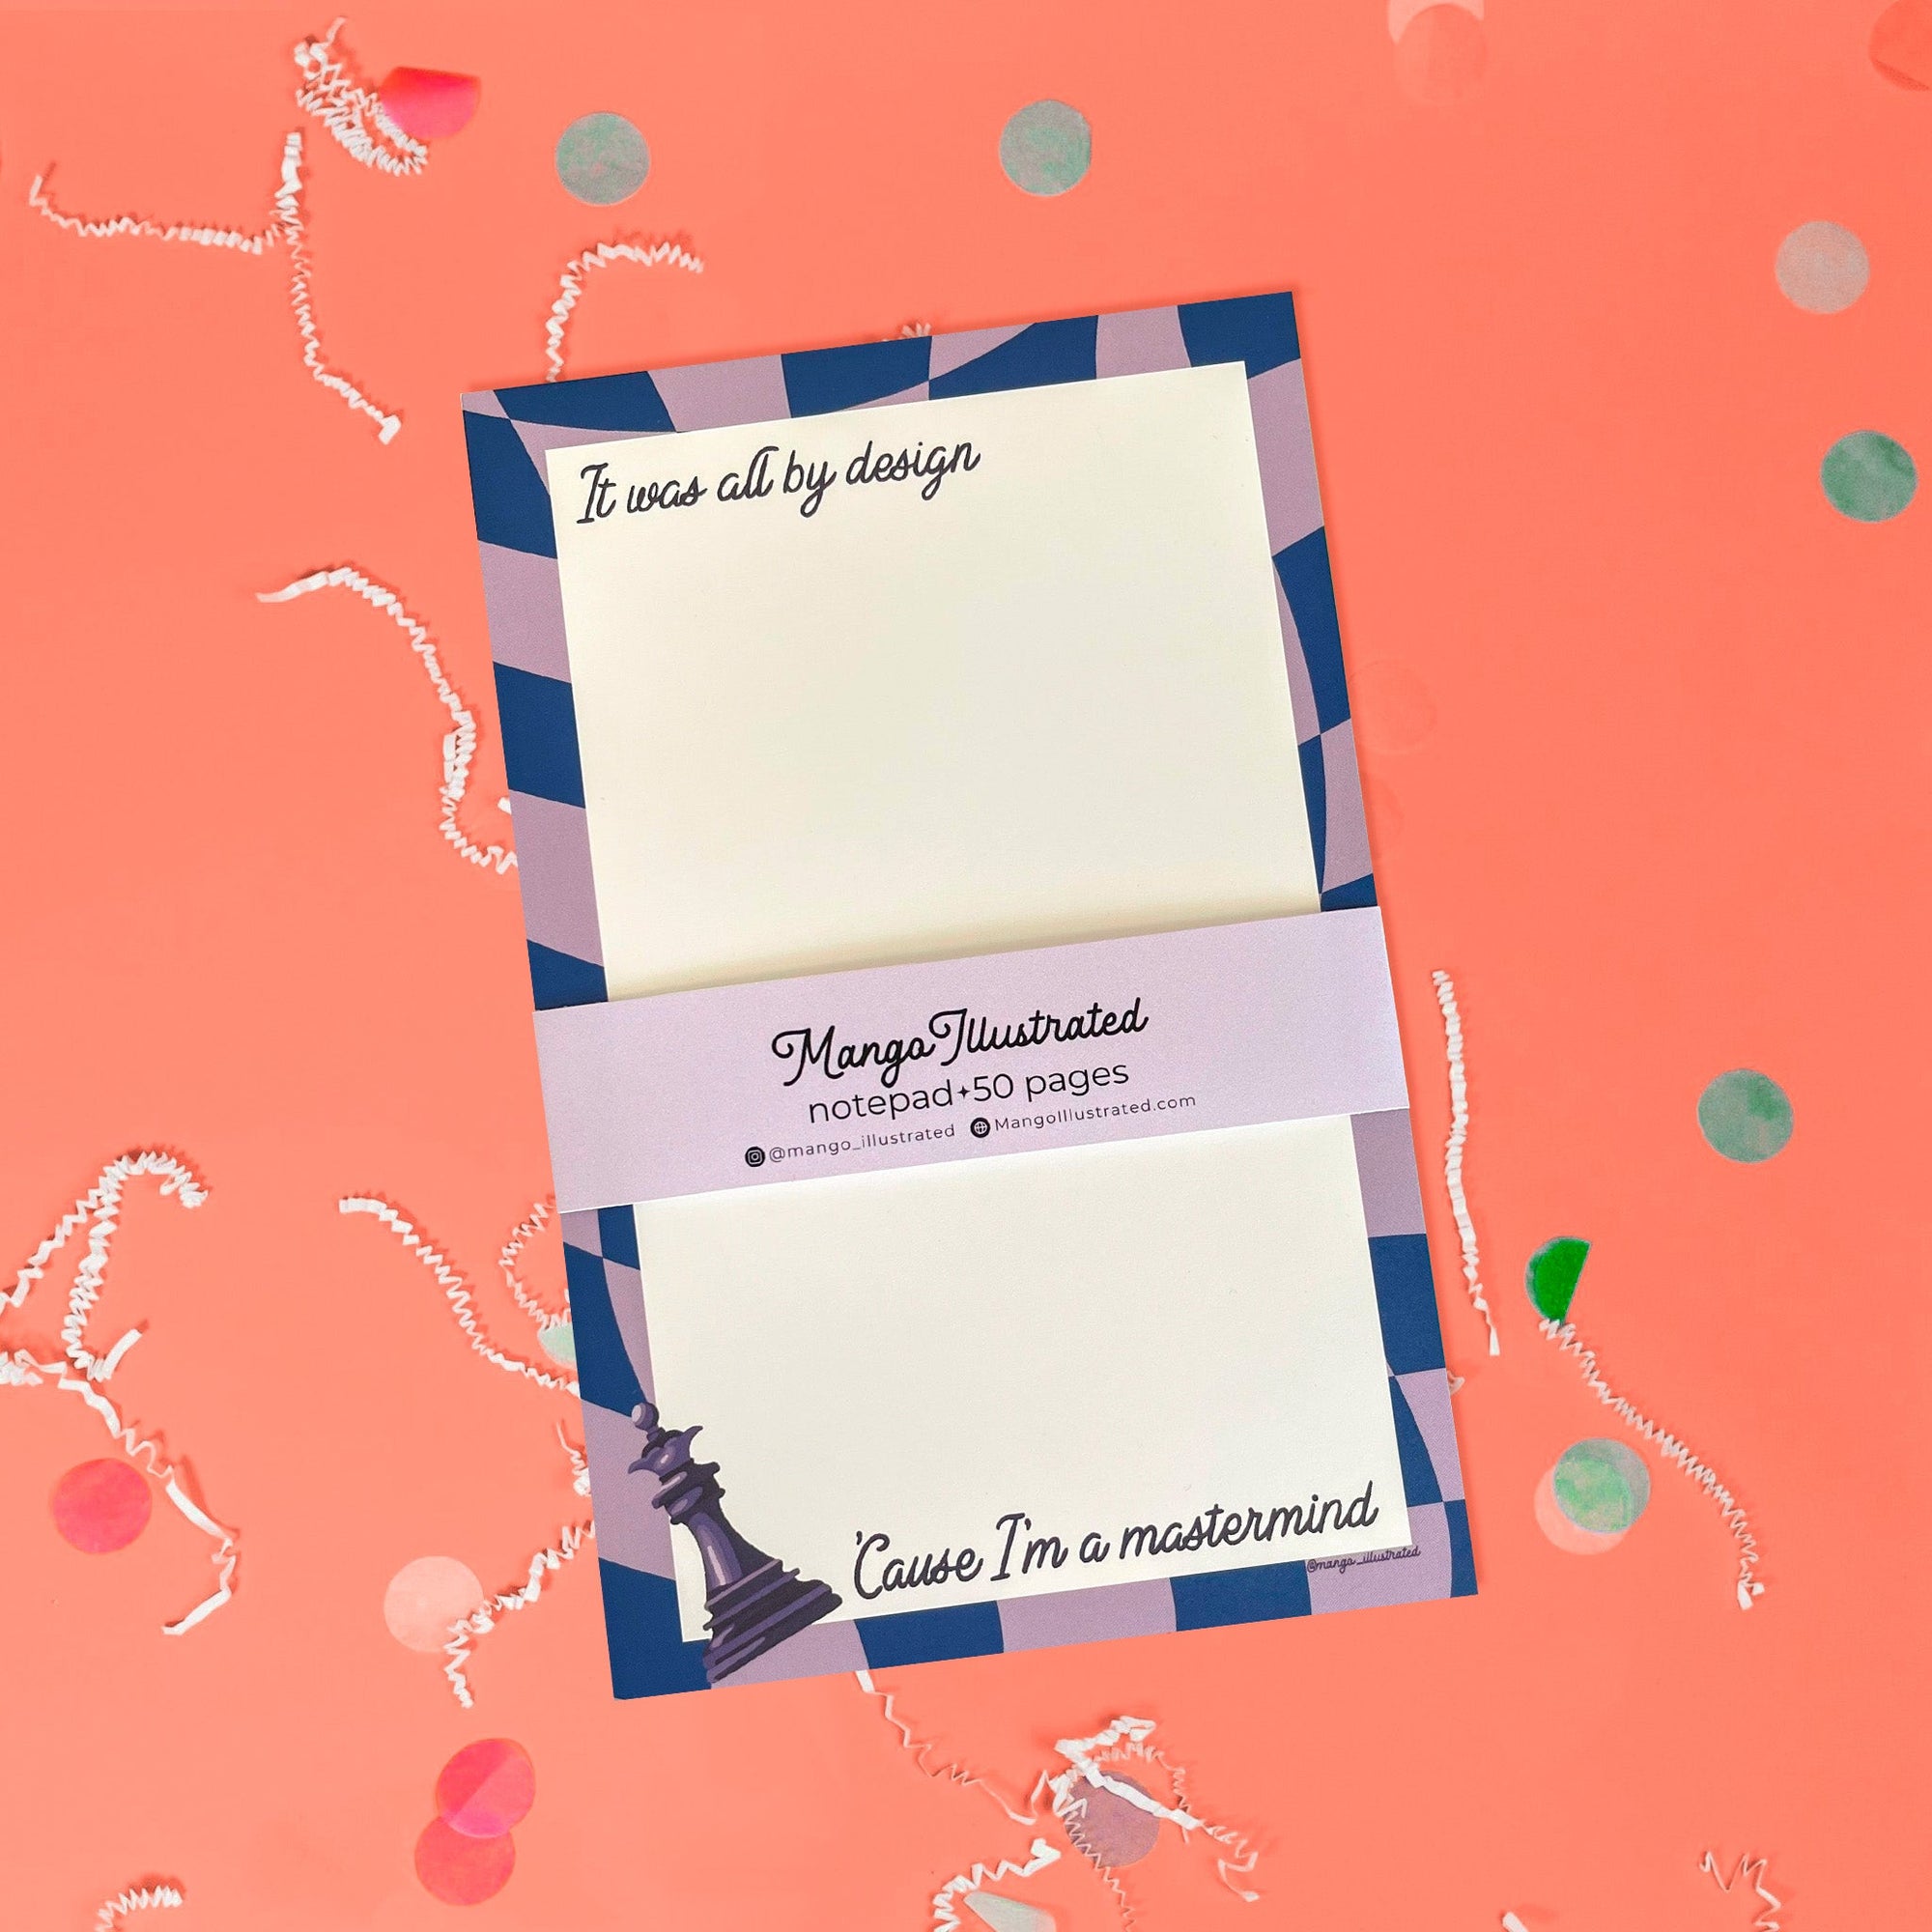 On a coral pink background sits a notepad with white crinkle and big, colorful confetti scattered around. This Taylor Swift inspired notepad is in navy and lavender with a cream background and it says at the top "It was all by design" in black script lettering and at the bottom it says "'Cause I'm a mastermind" in black script lettering. There is a chess piece illustration.